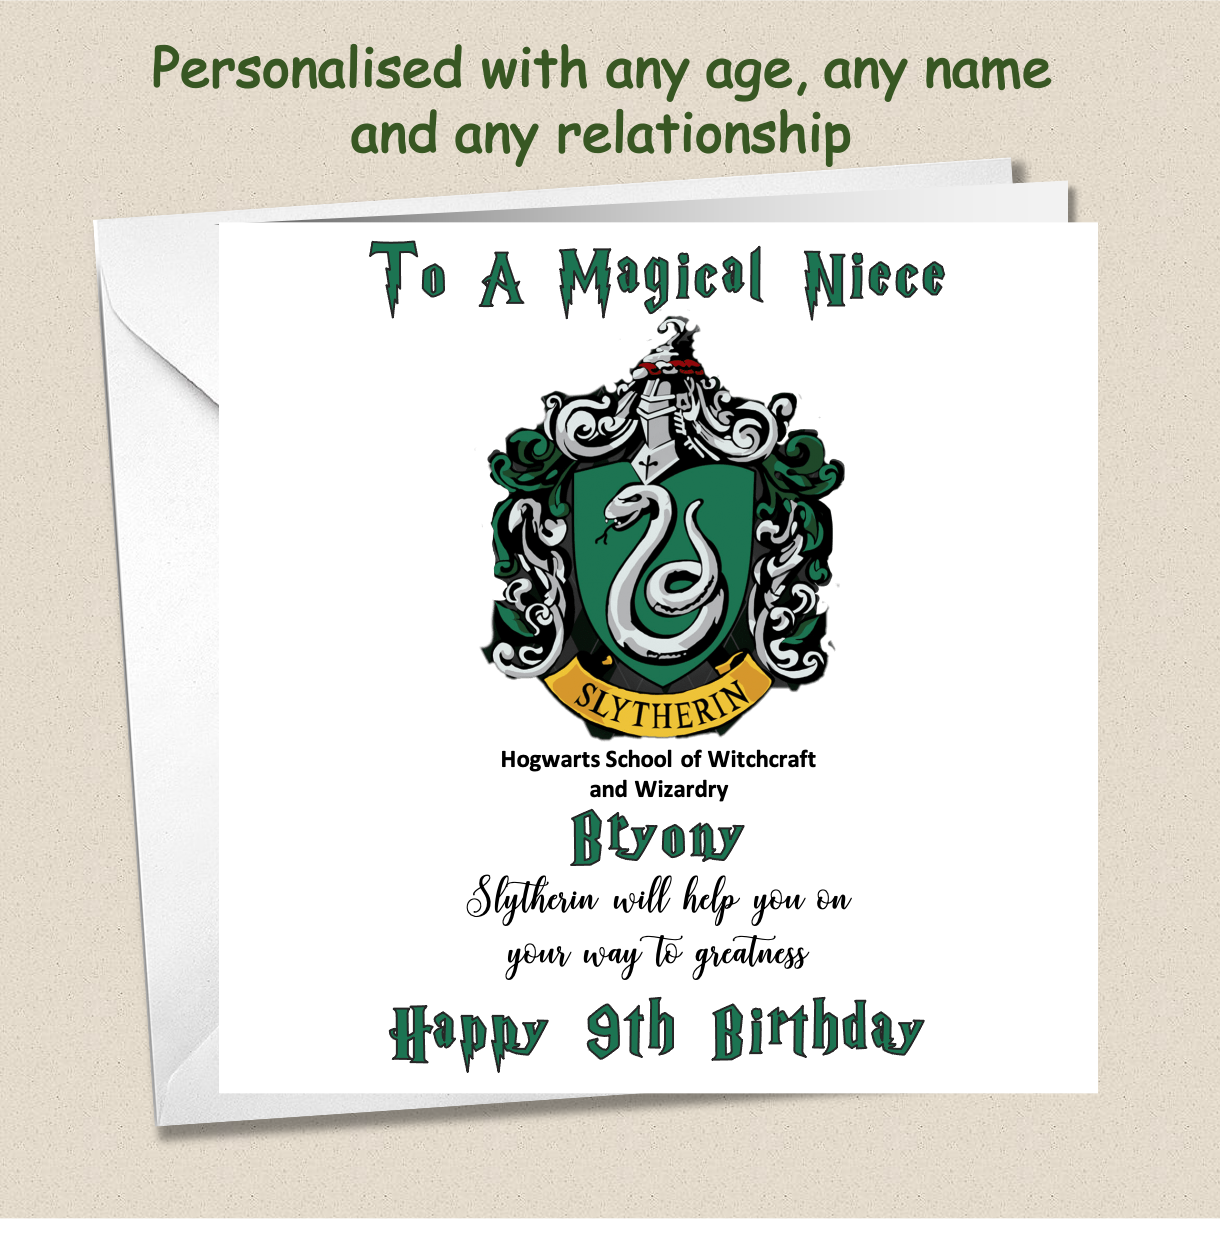 A personalised Slytherin birthday card, with Slytherin logo and motto, all in Harry Potter font.